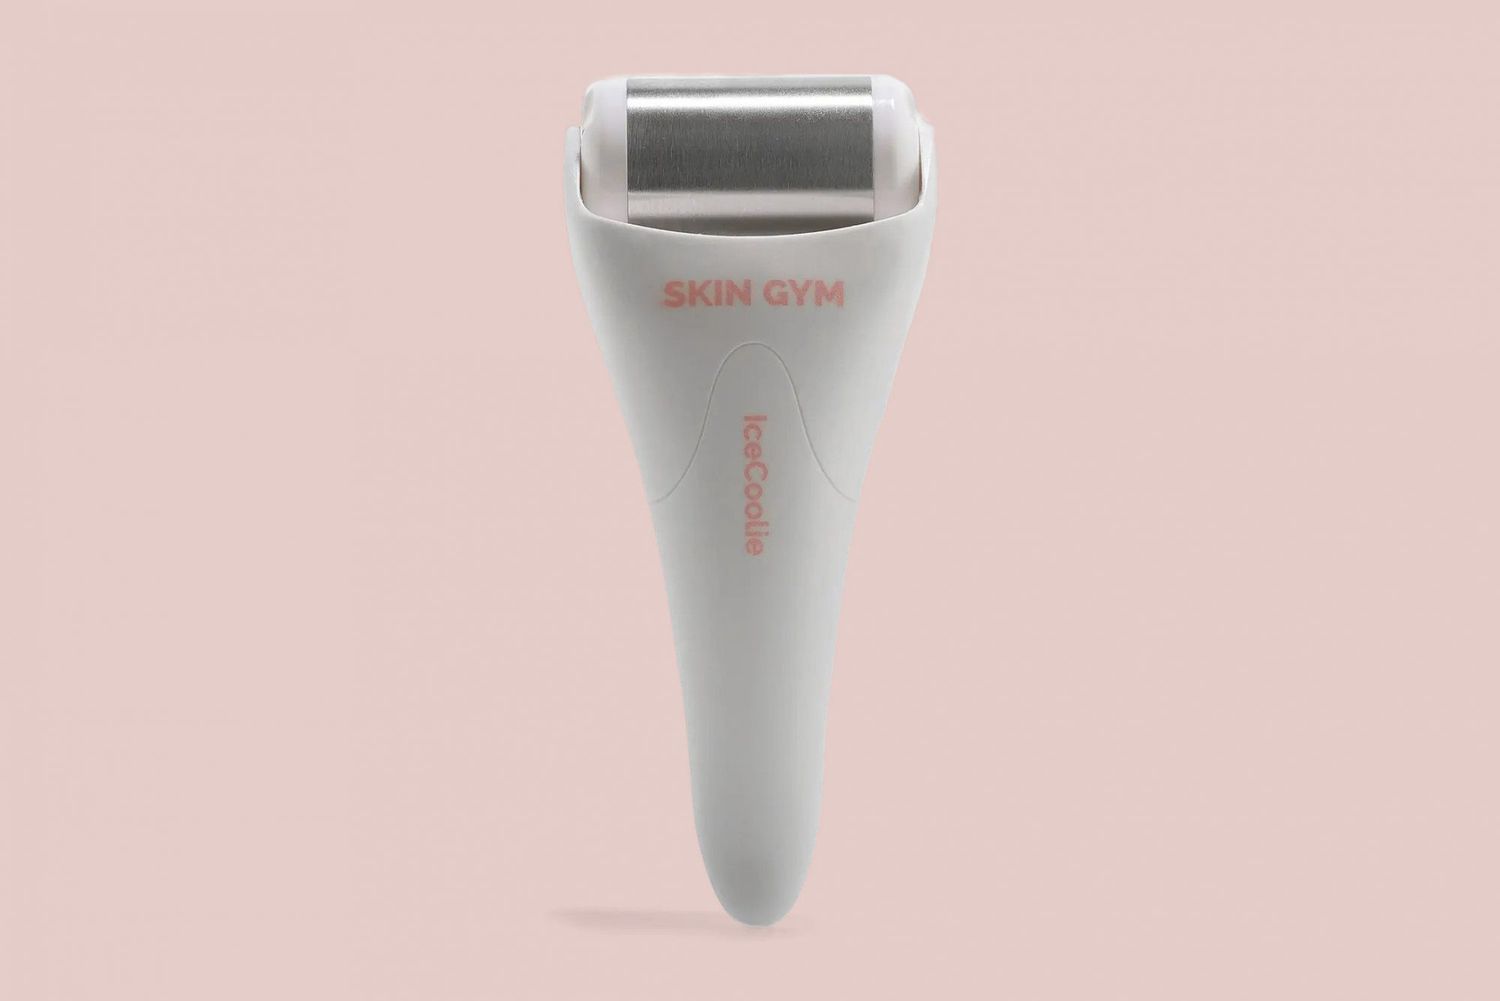 Skin Gym IceCoolie Ice Therapy Device